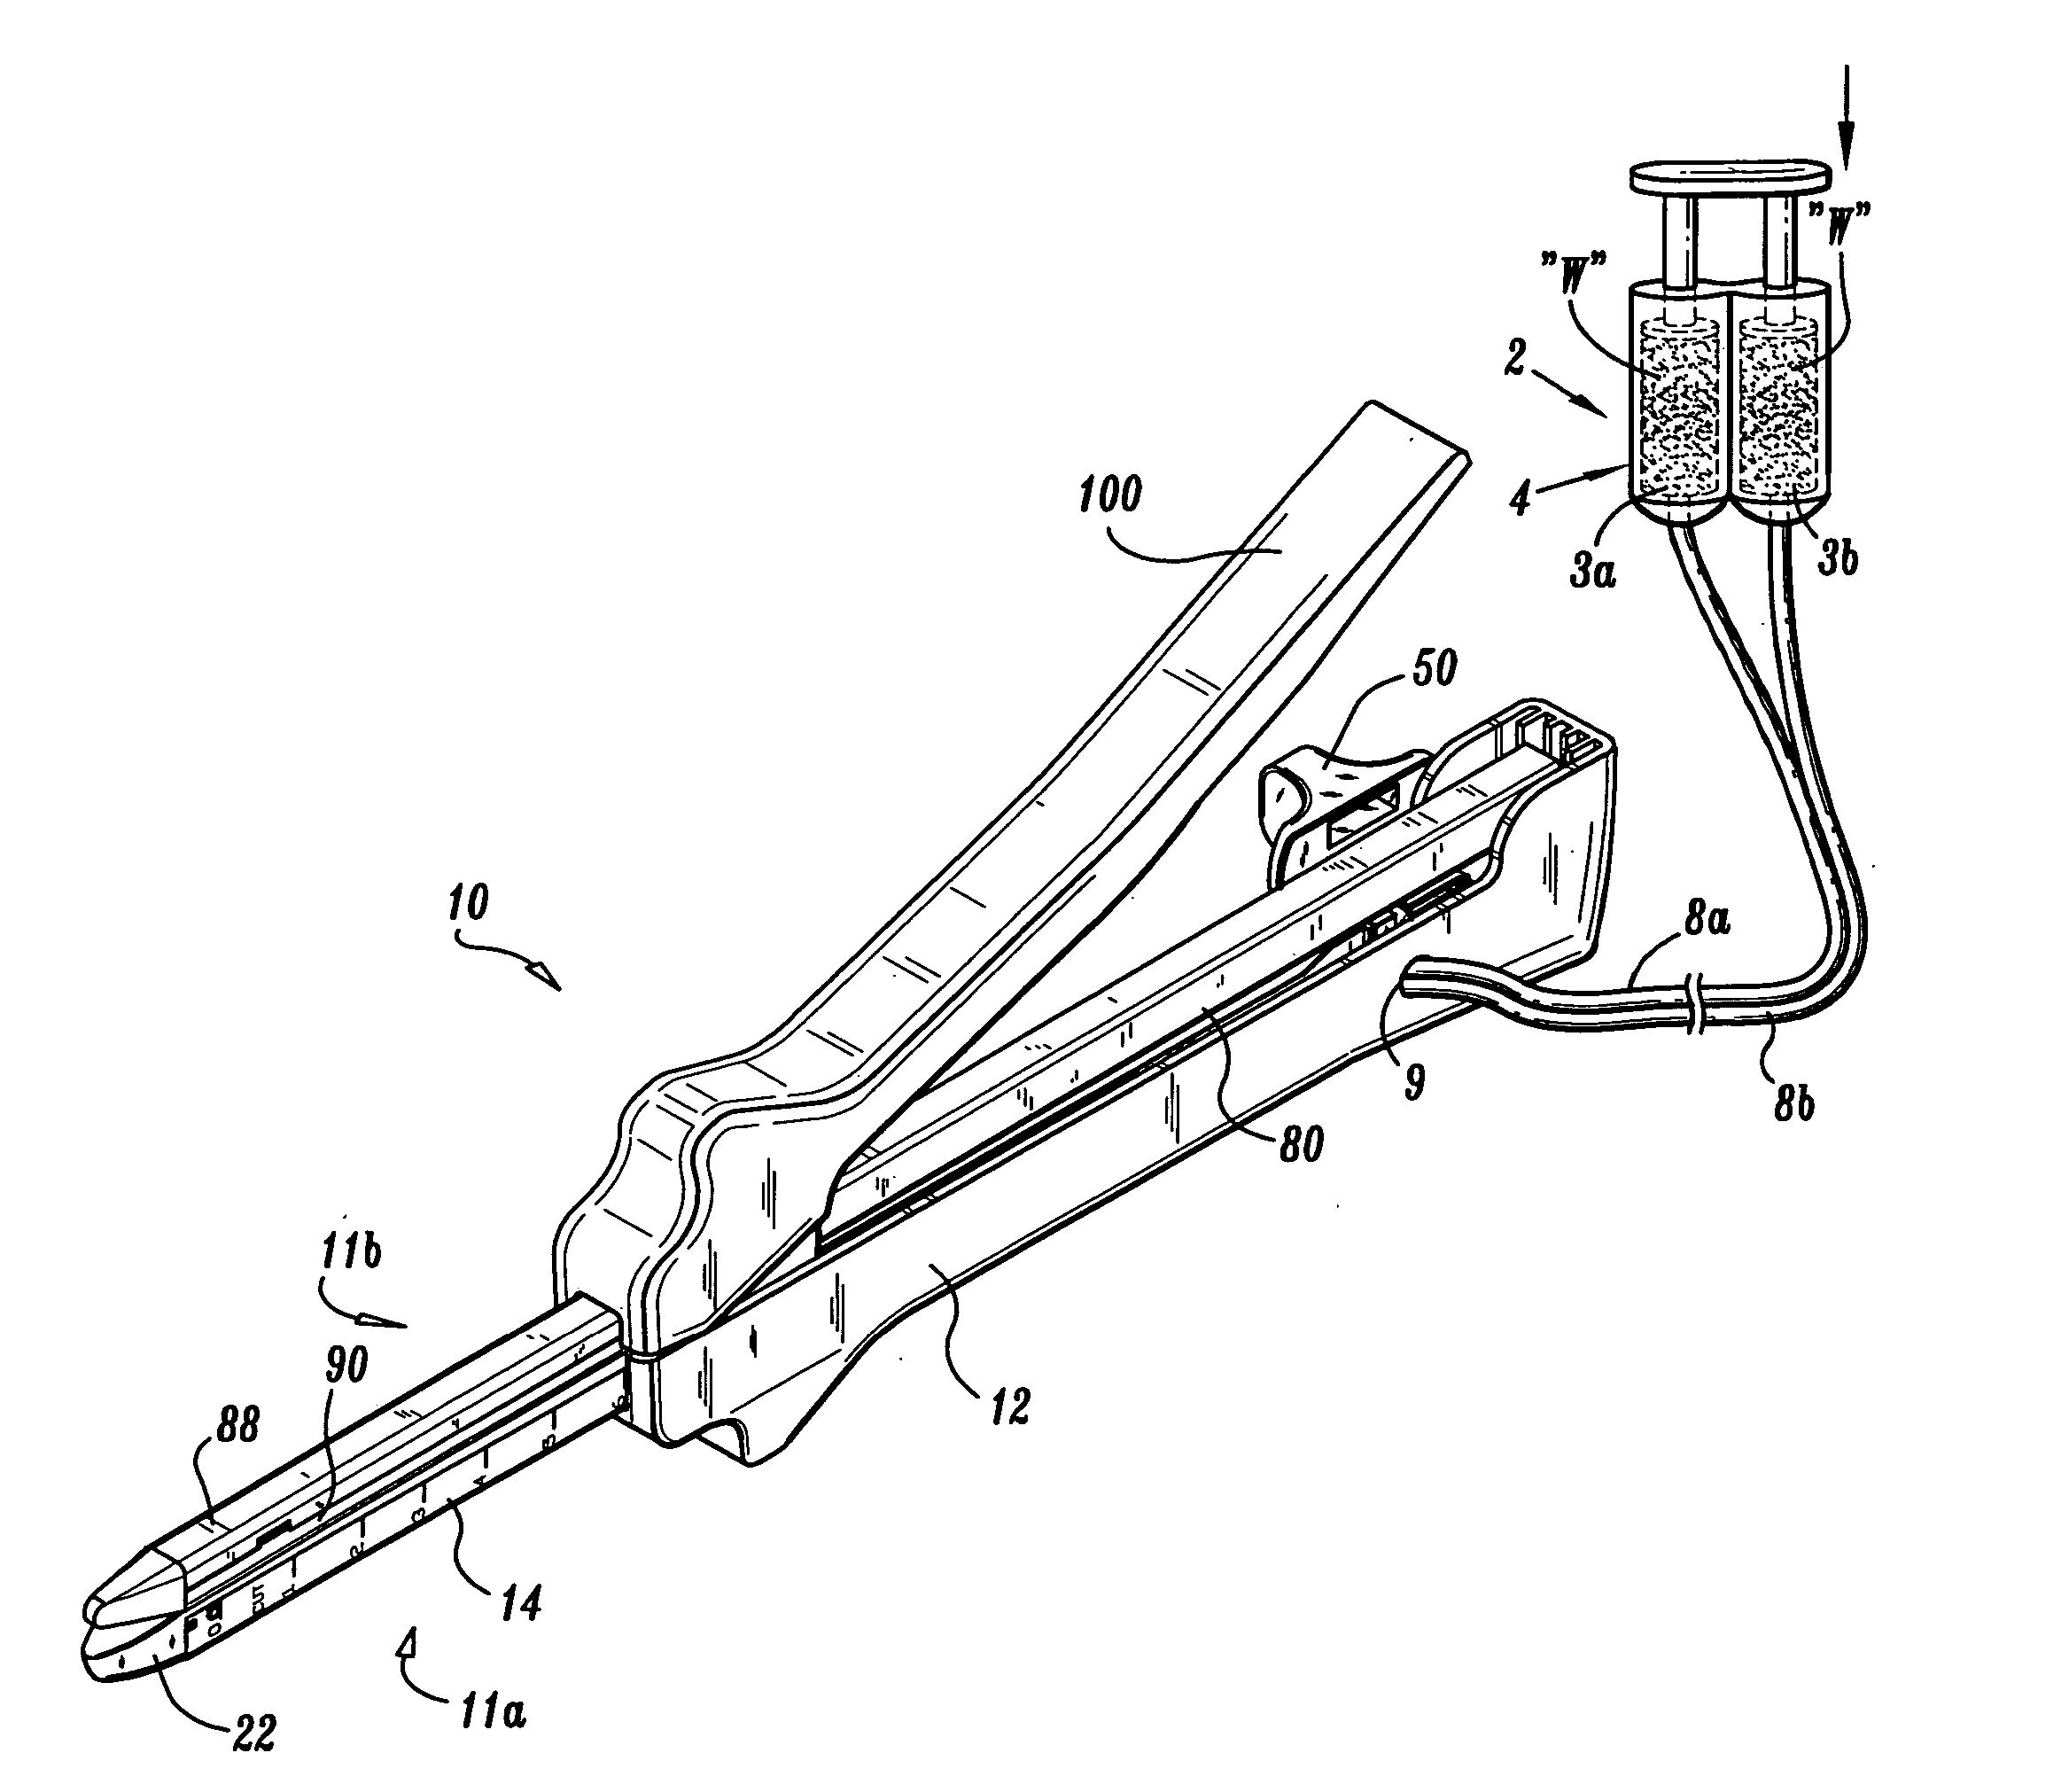 Wound closure material applicator and stapler